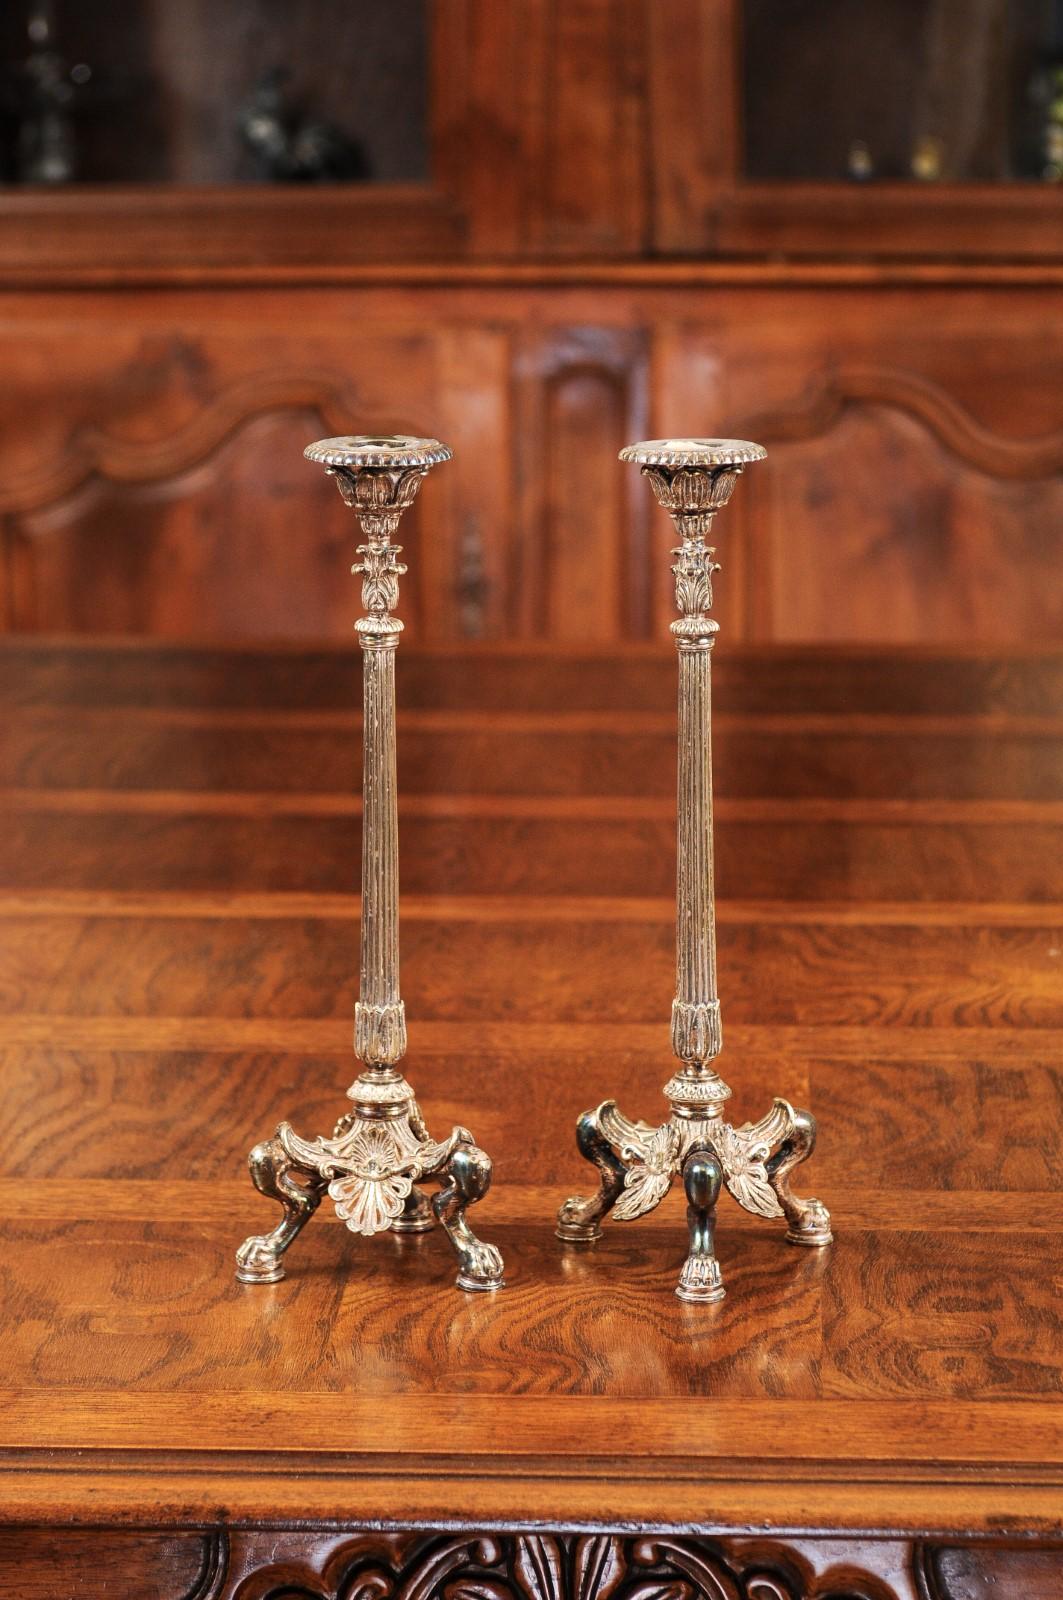 A pair of French silver candlesticks from the late 19th century, with foliage, palmettes and lion paw feet. Created in France during the last quarter of the 19th century, each of this pair of silver candlesticks features a fluted shaft topped with